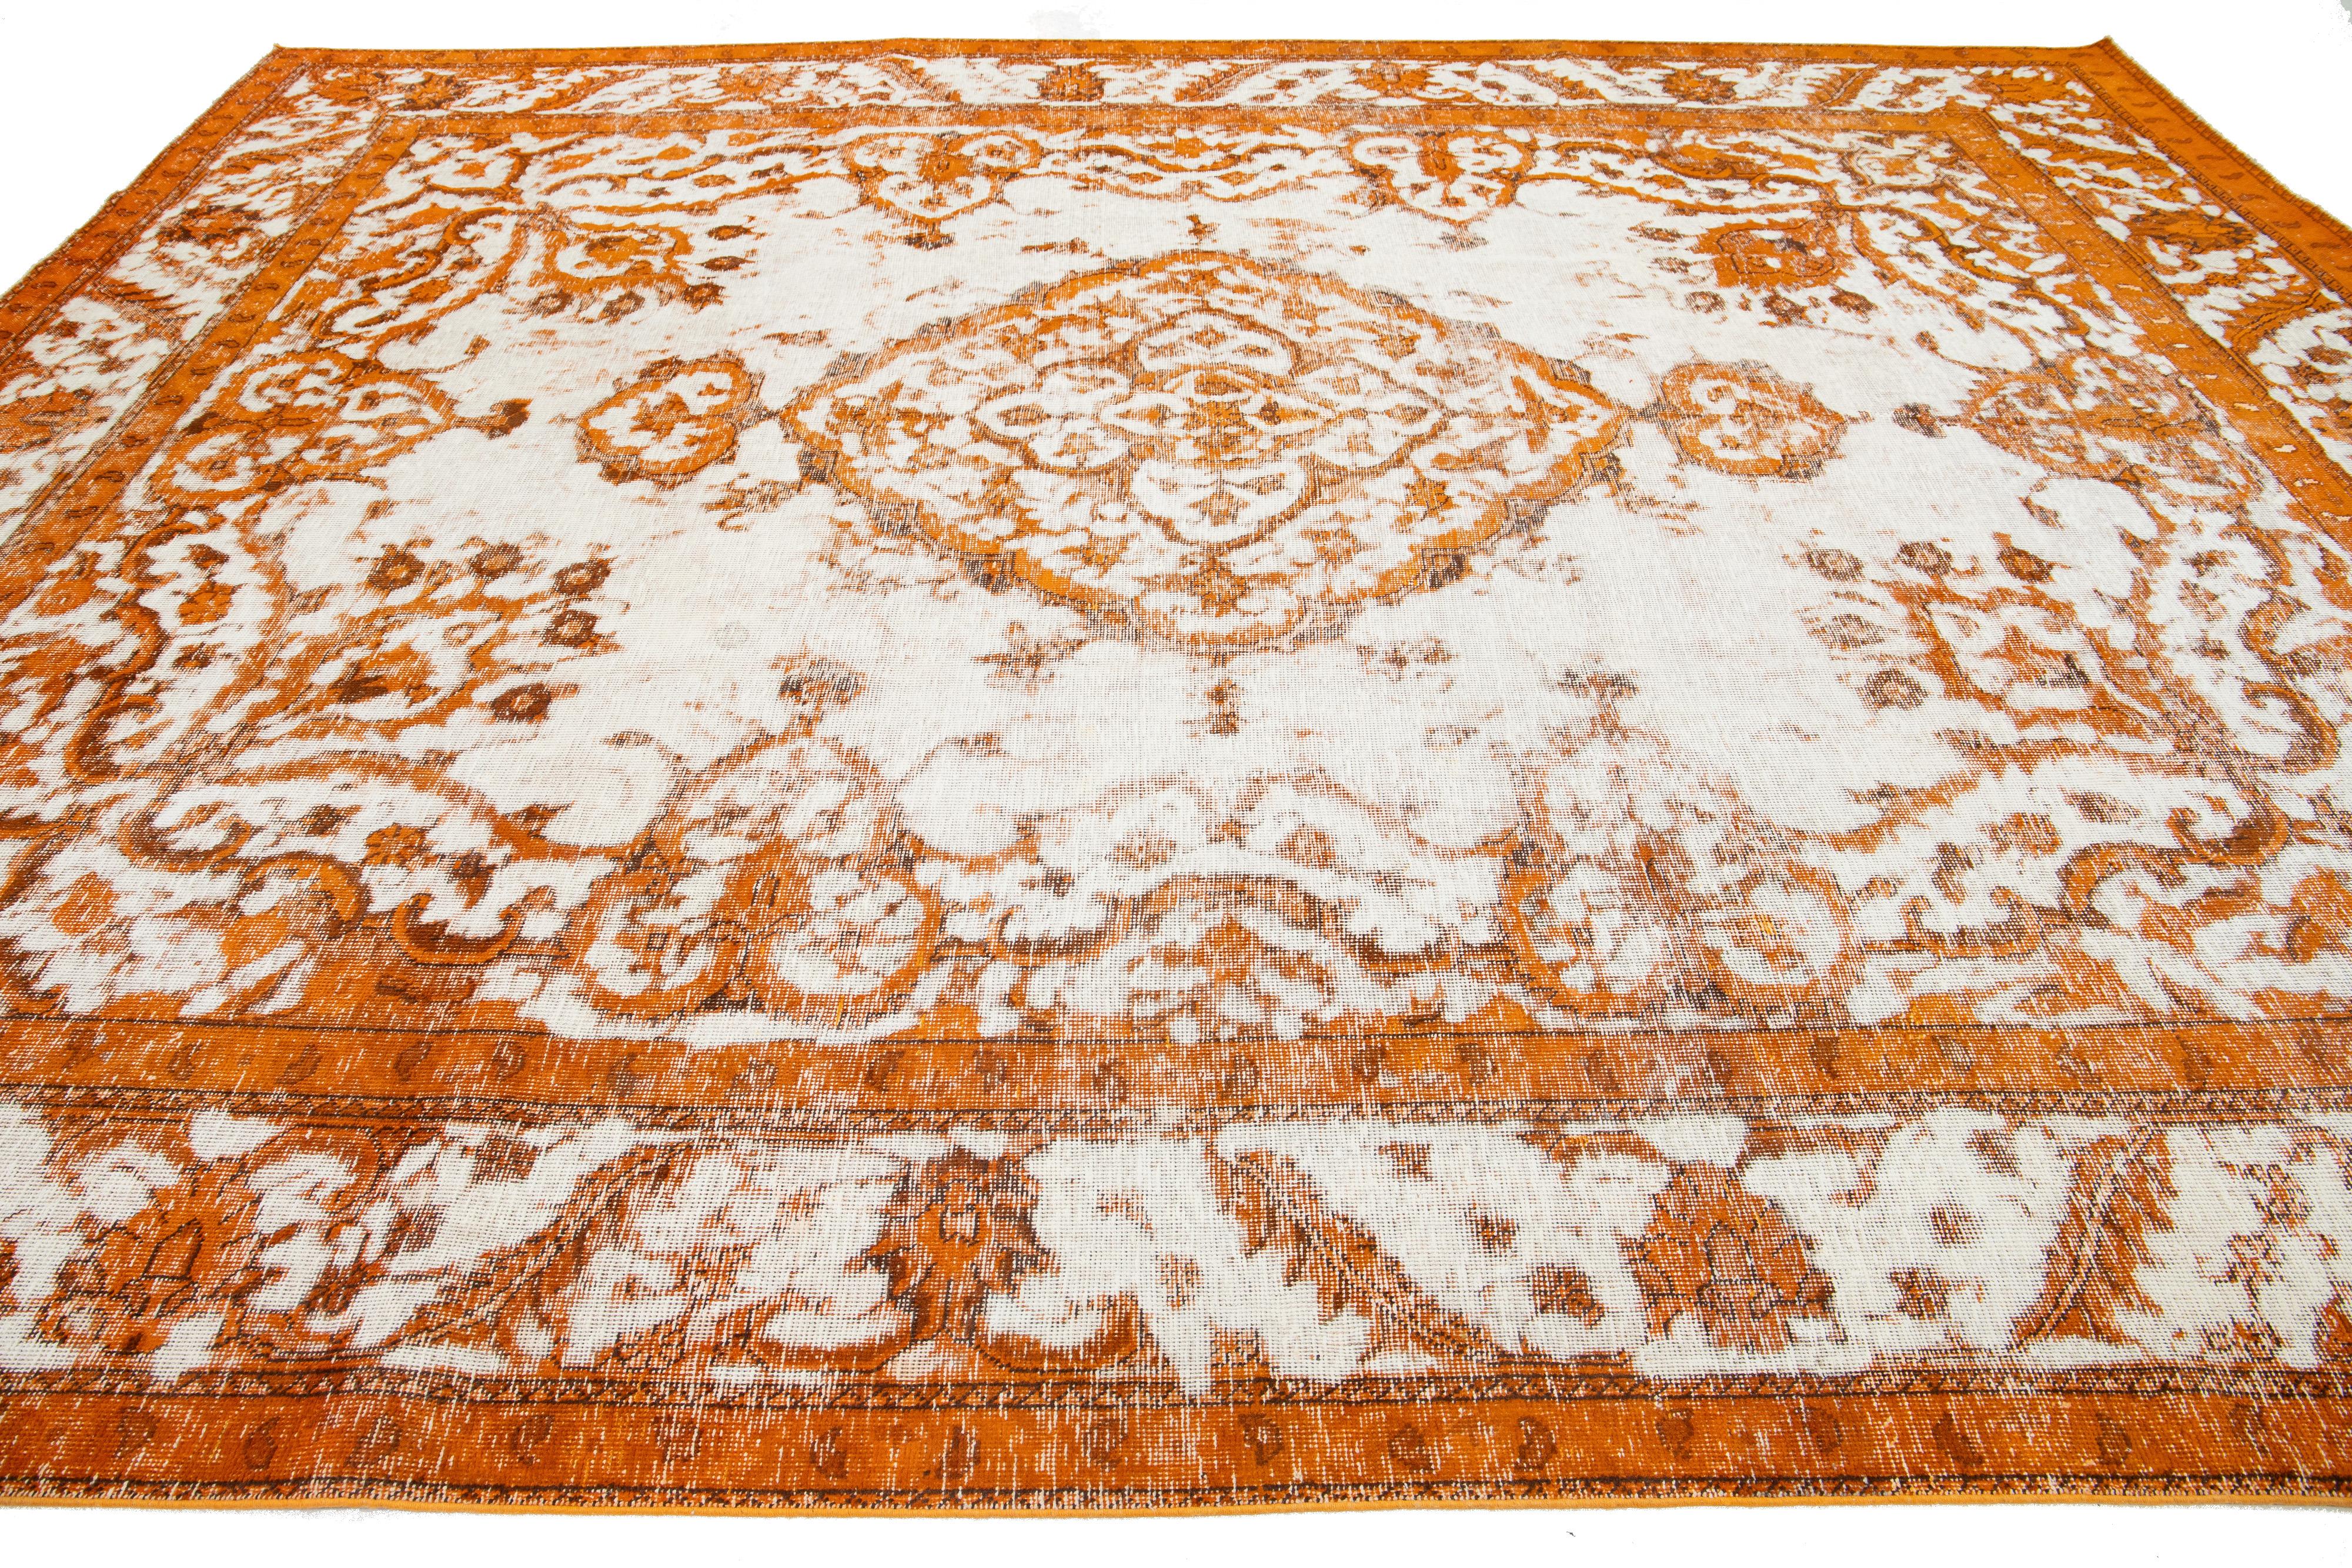  Overdyed Antique Orange Wool Rug With Medallion Motif In Good Condition For Sale In Norwalk, CT